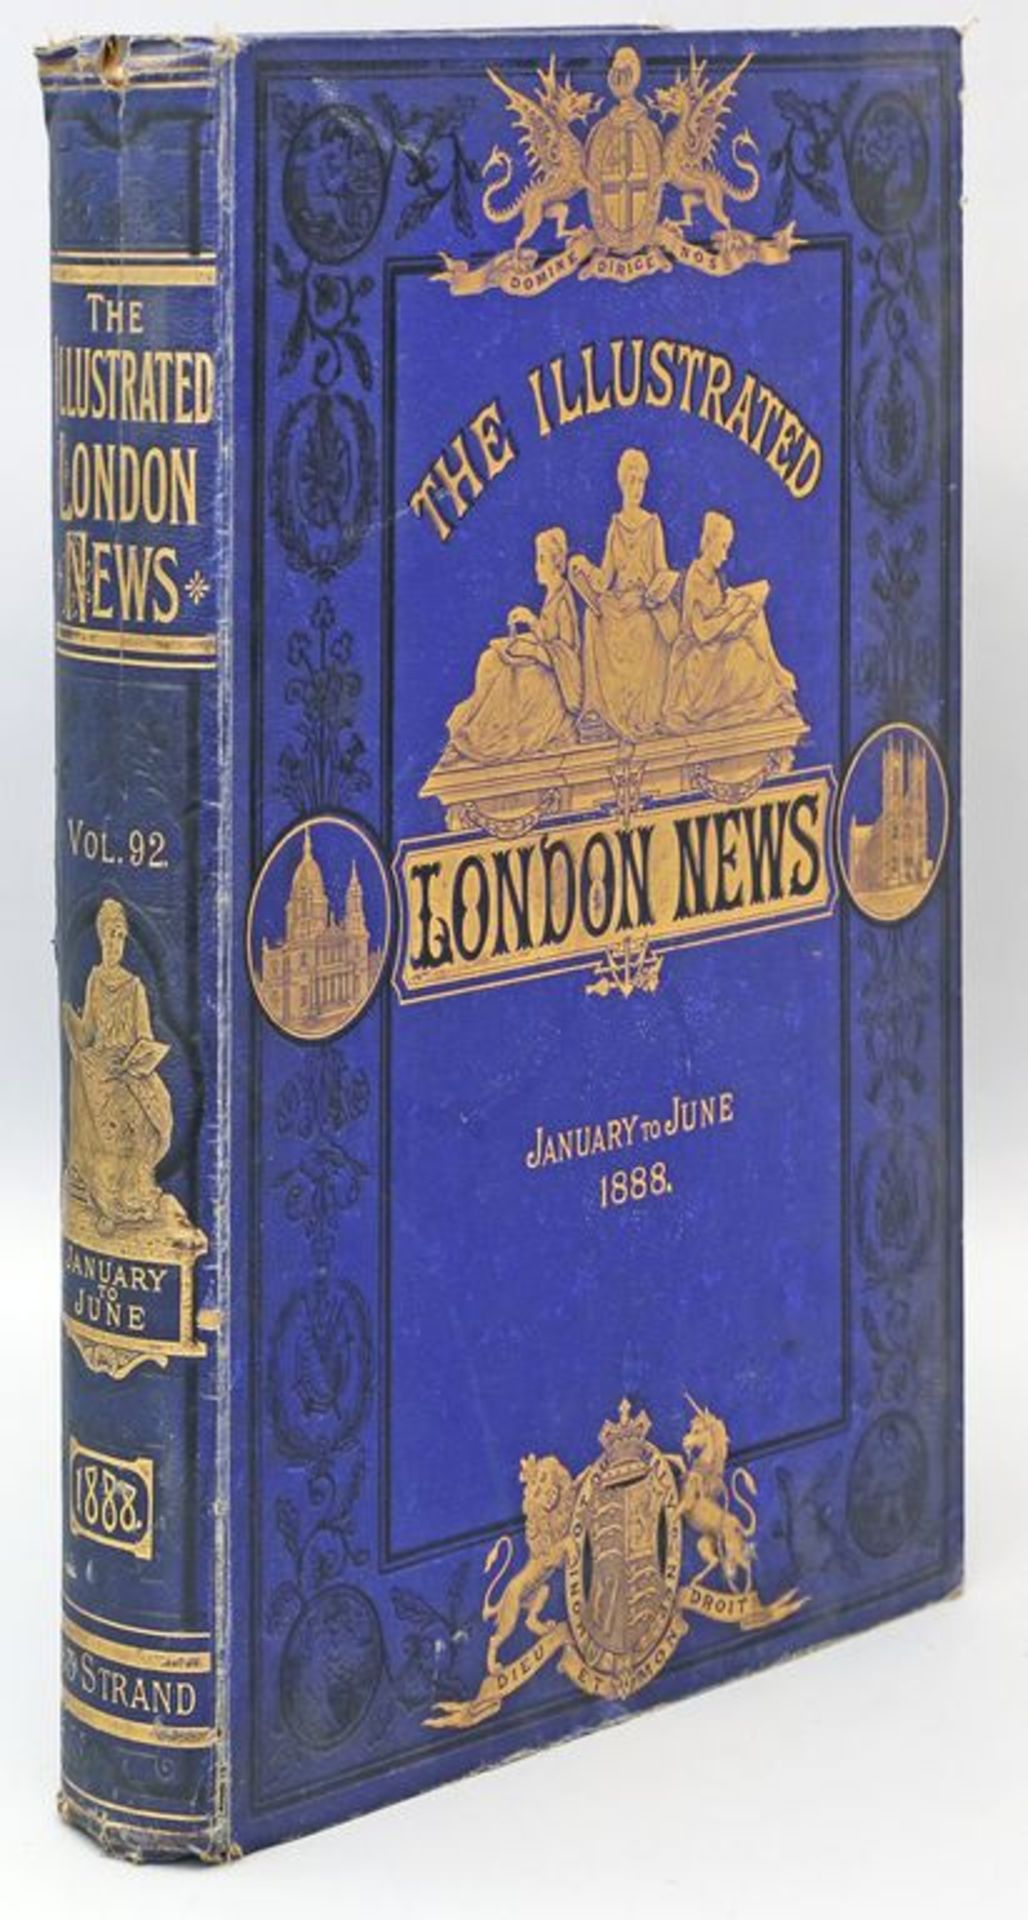 "The Illustrated London News. January to June 1888".